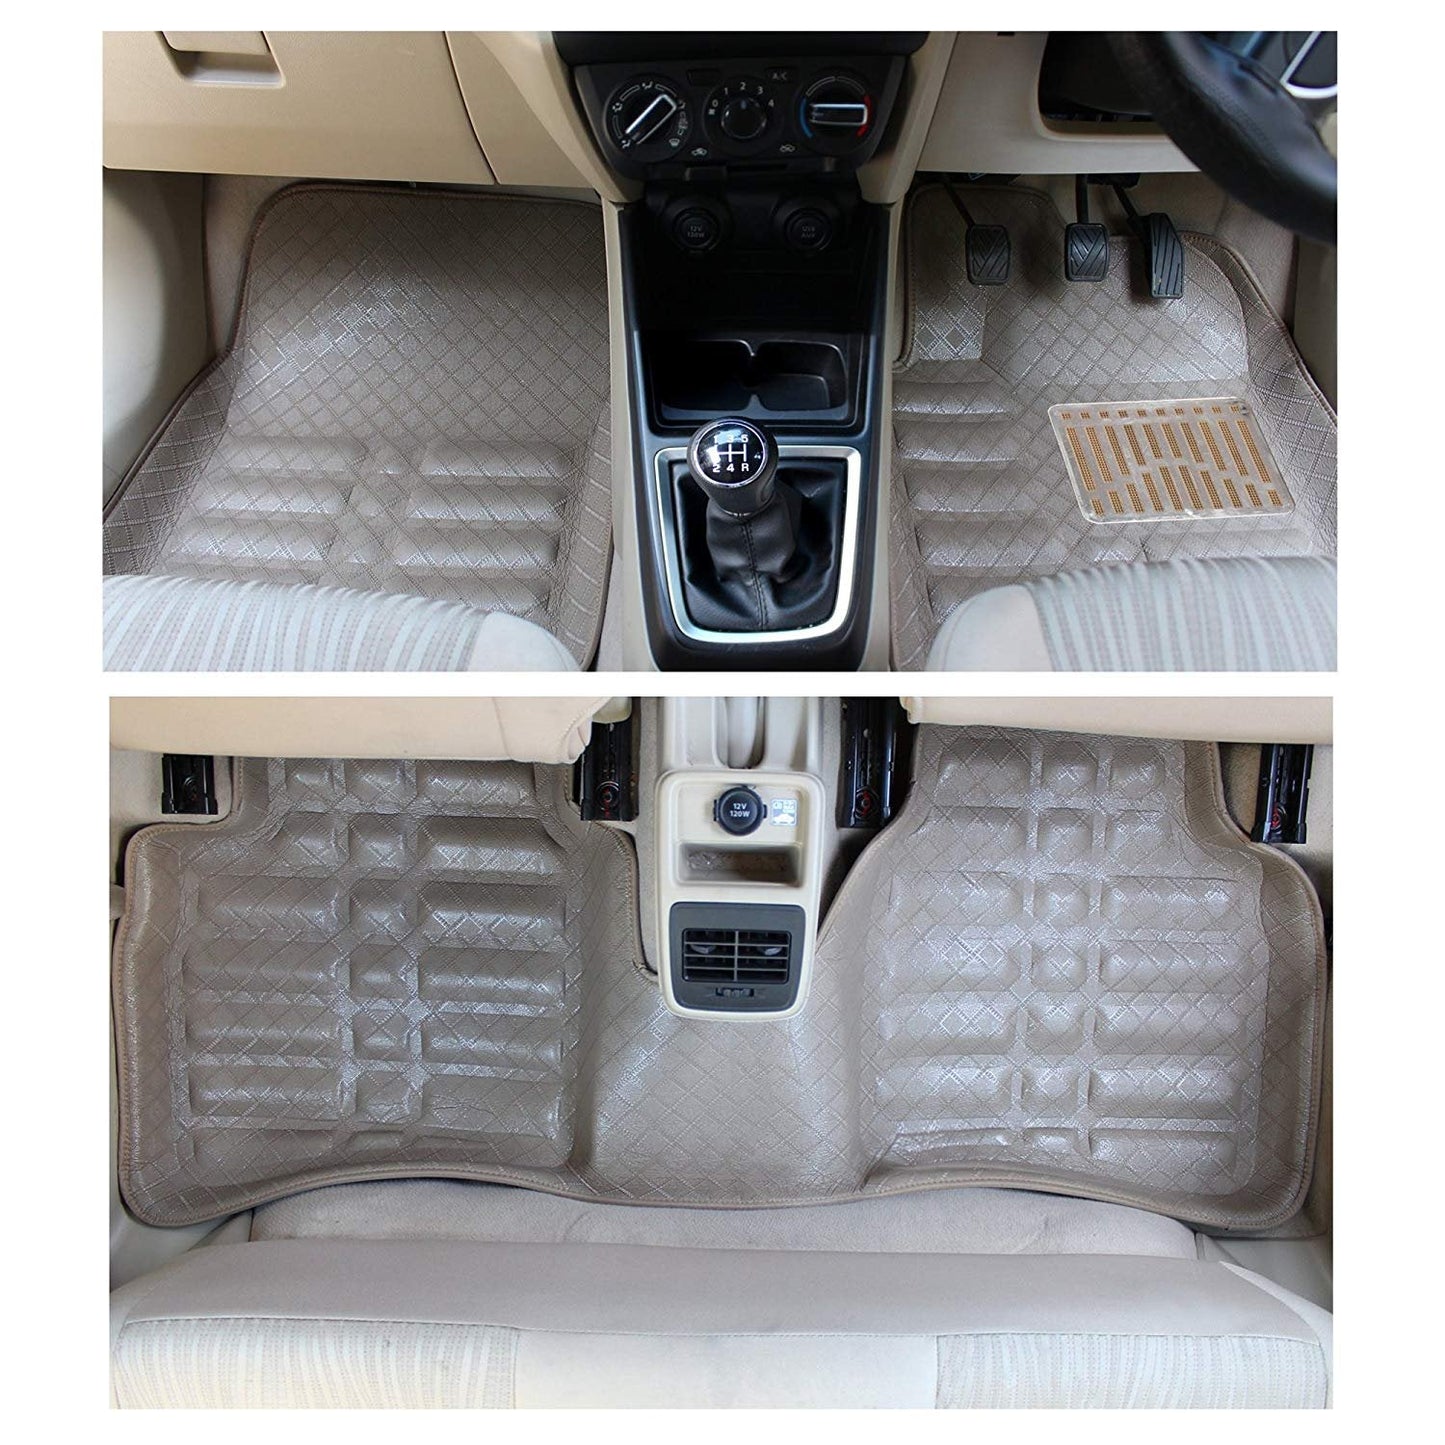 Oshotto 4D Artificial Leather Car Floor Mats For Maruti Suzuki WagonR 2019-2023 - Set of 3 (2 pcs Front & one Long Single Rear pc) - Beige